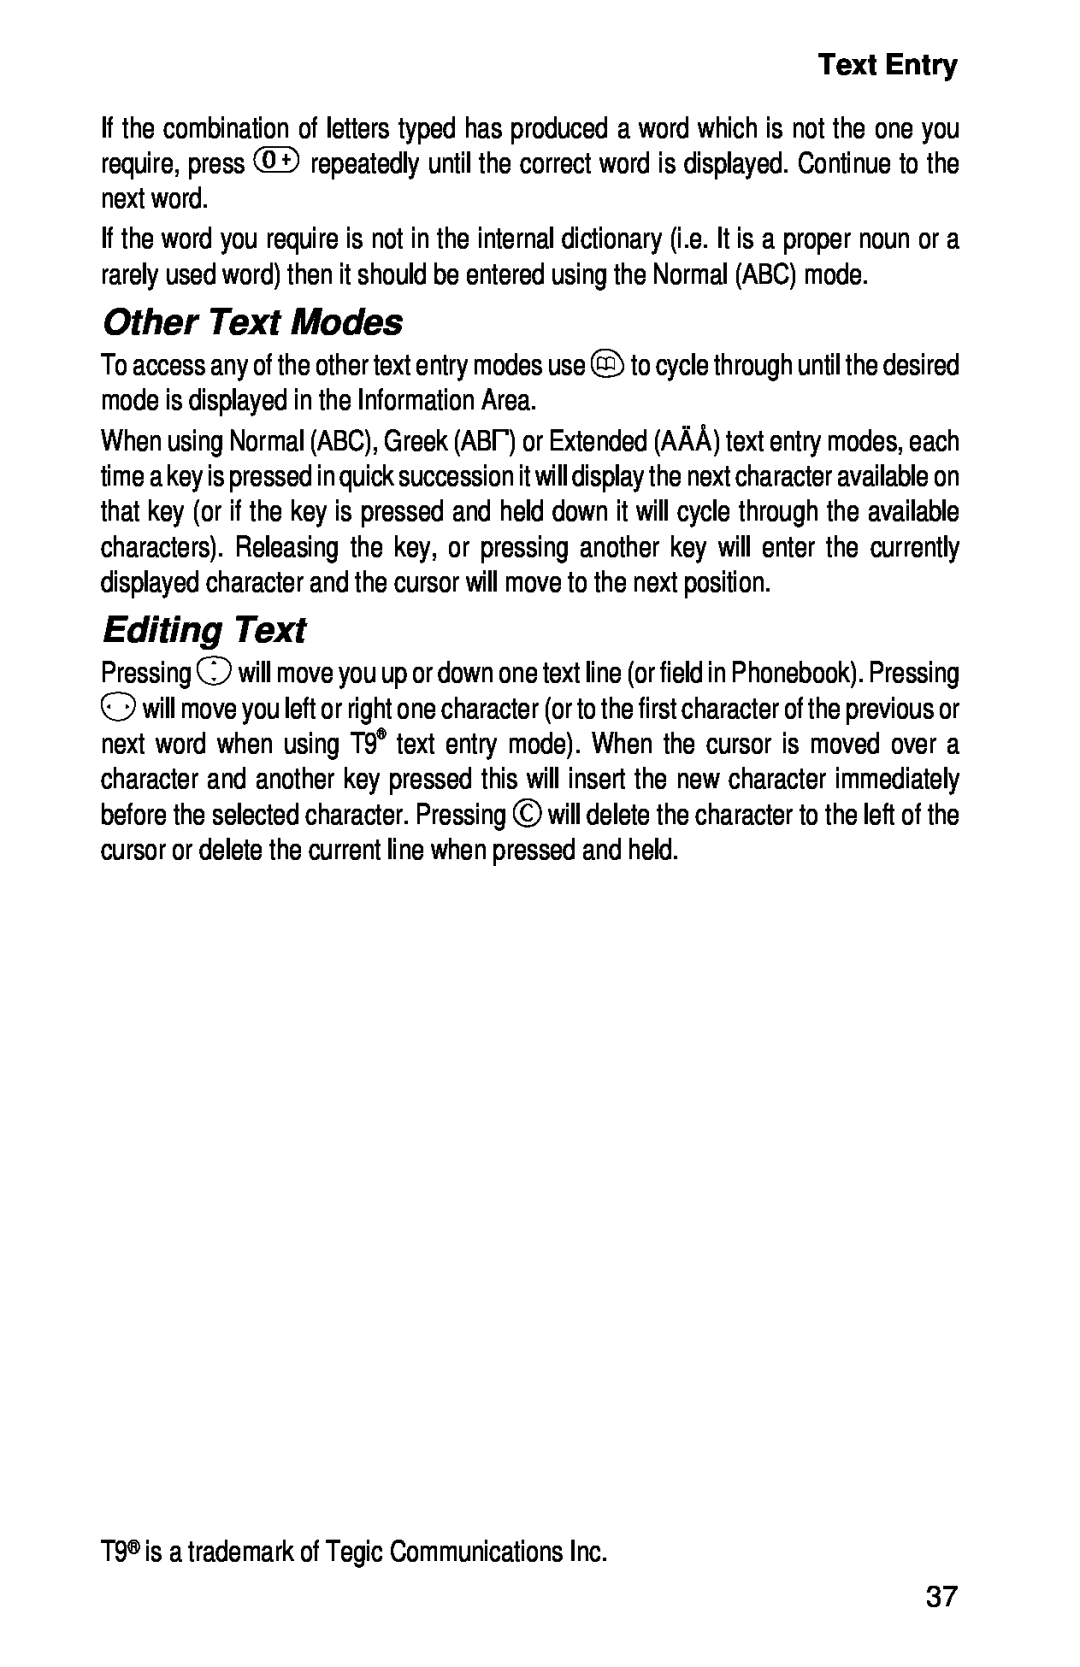 Panasonic EB-GD52 operating instructions Other Text Modes, Editing Text, Text Entry 